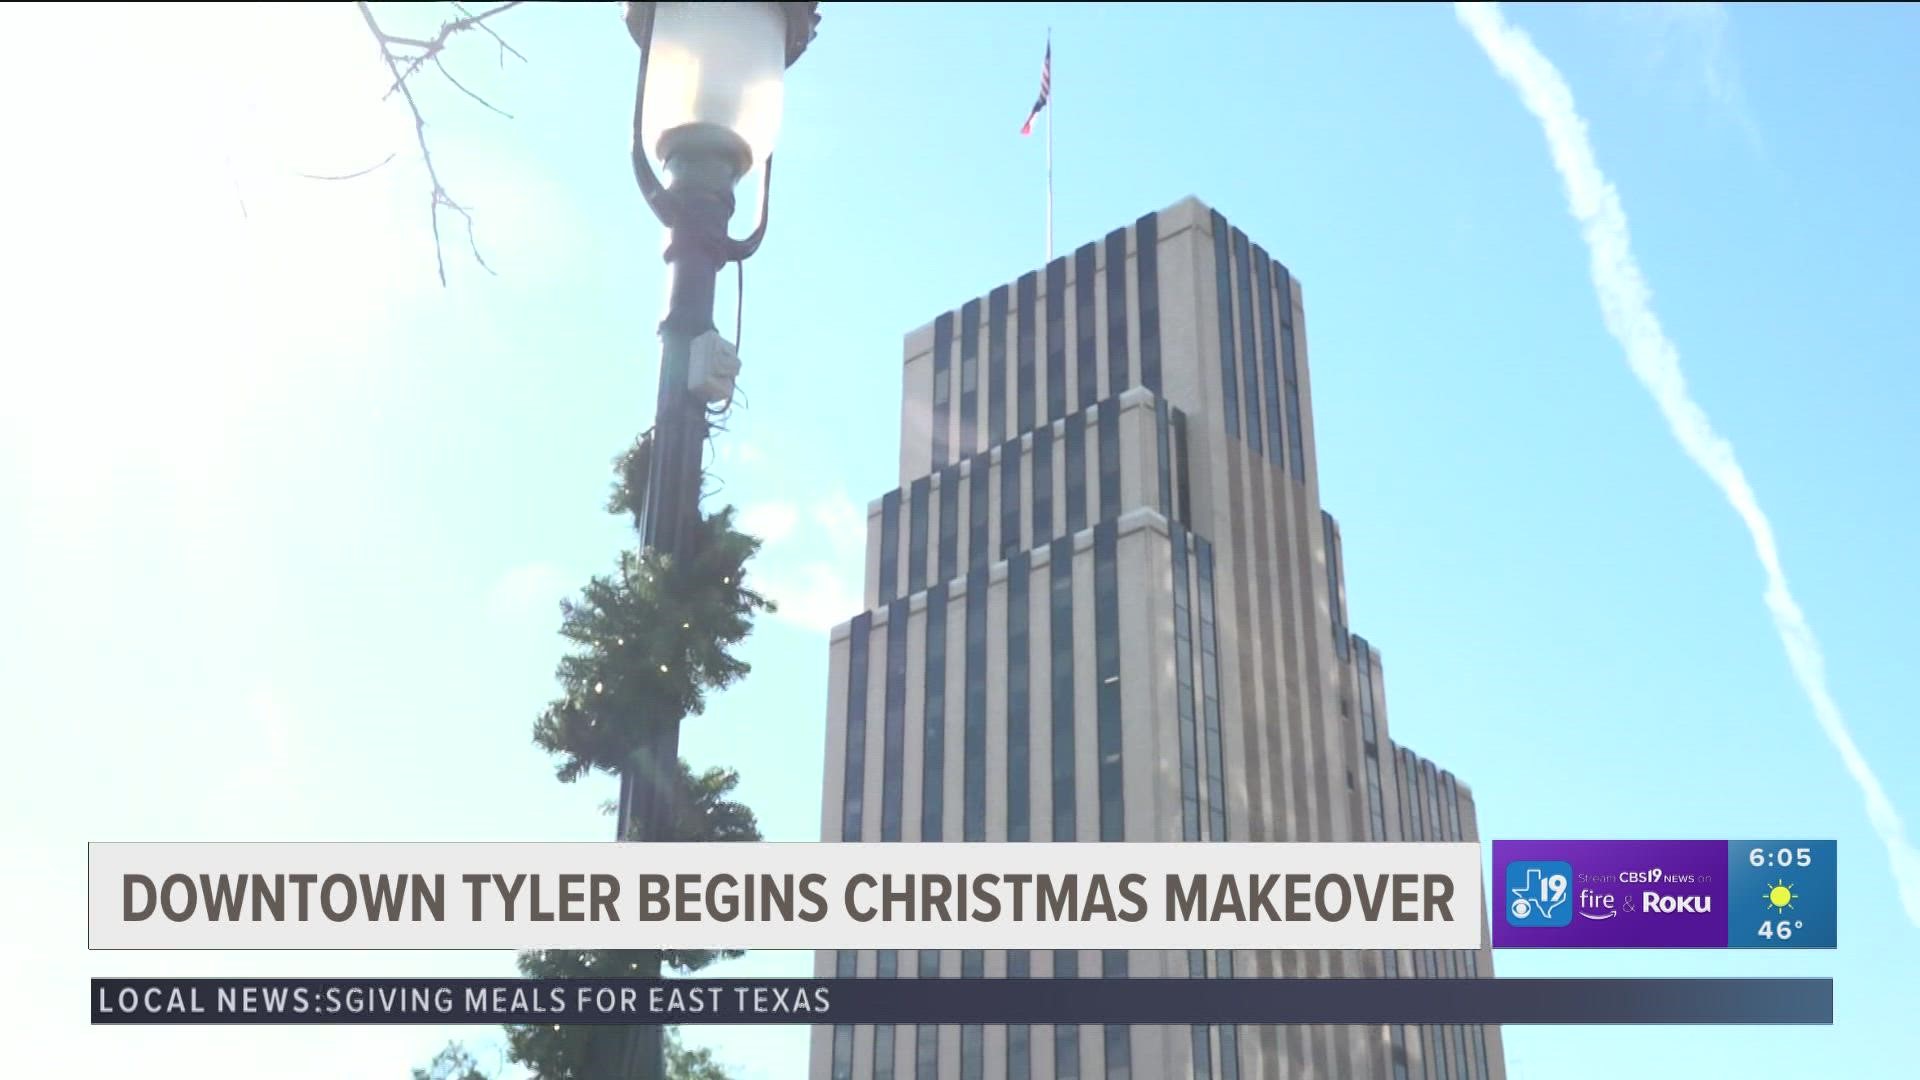 Local business brings Christmas magic to downtown Tyler